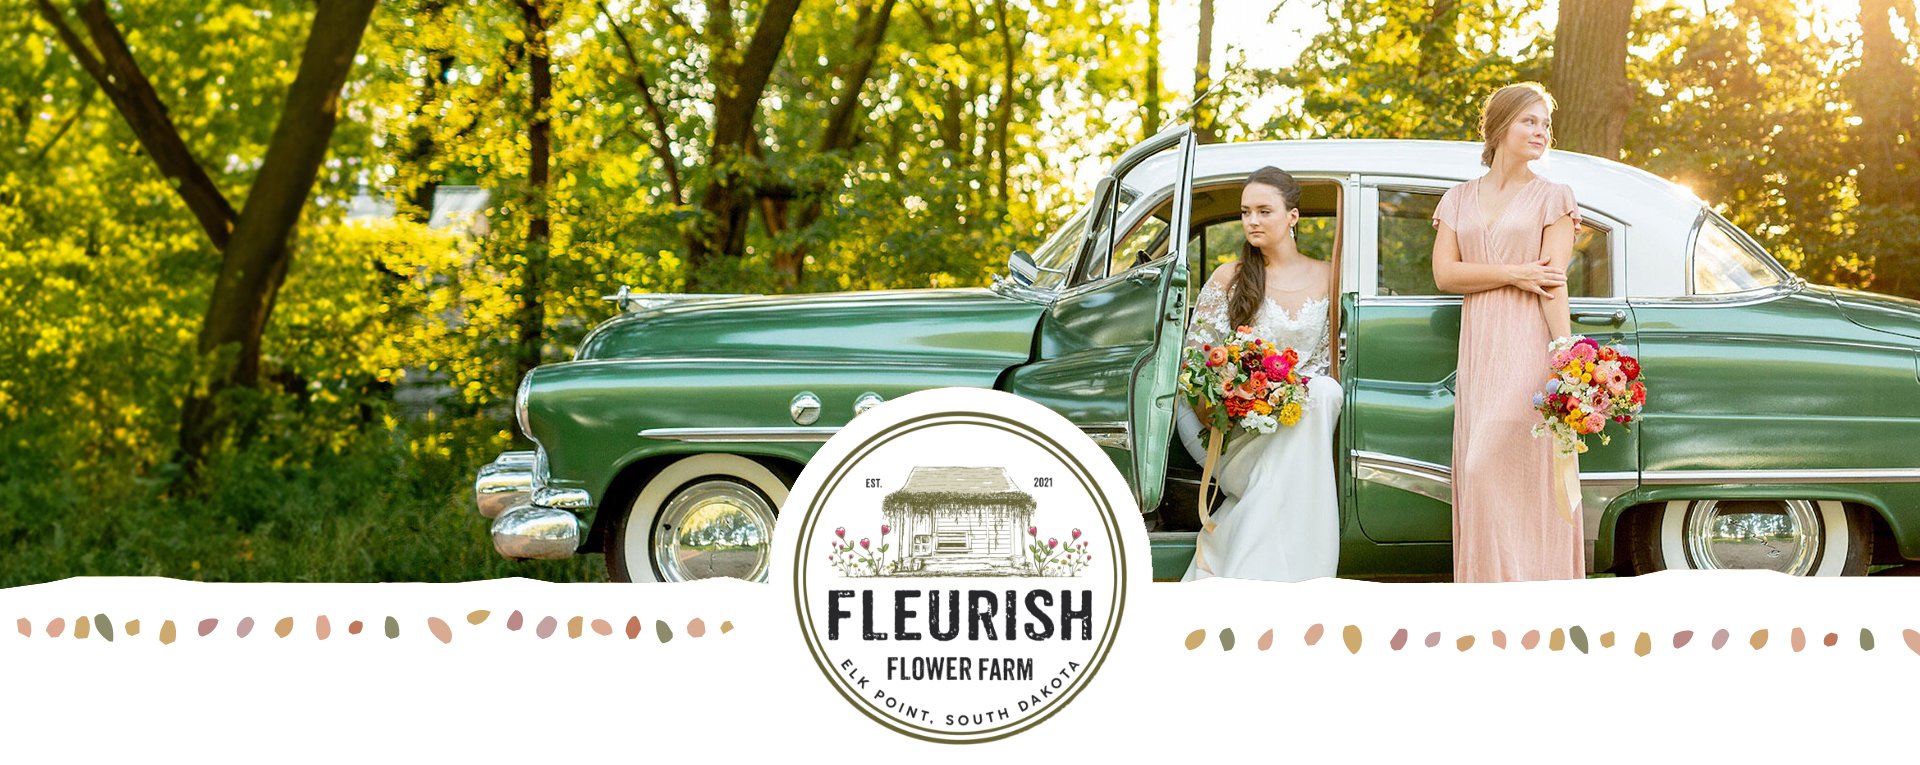 Vintage green sedan with a bride sitting in the drivers seat. Her bridesmaid is standing next to her both are holding Fleurish Flower Farm bouquets.